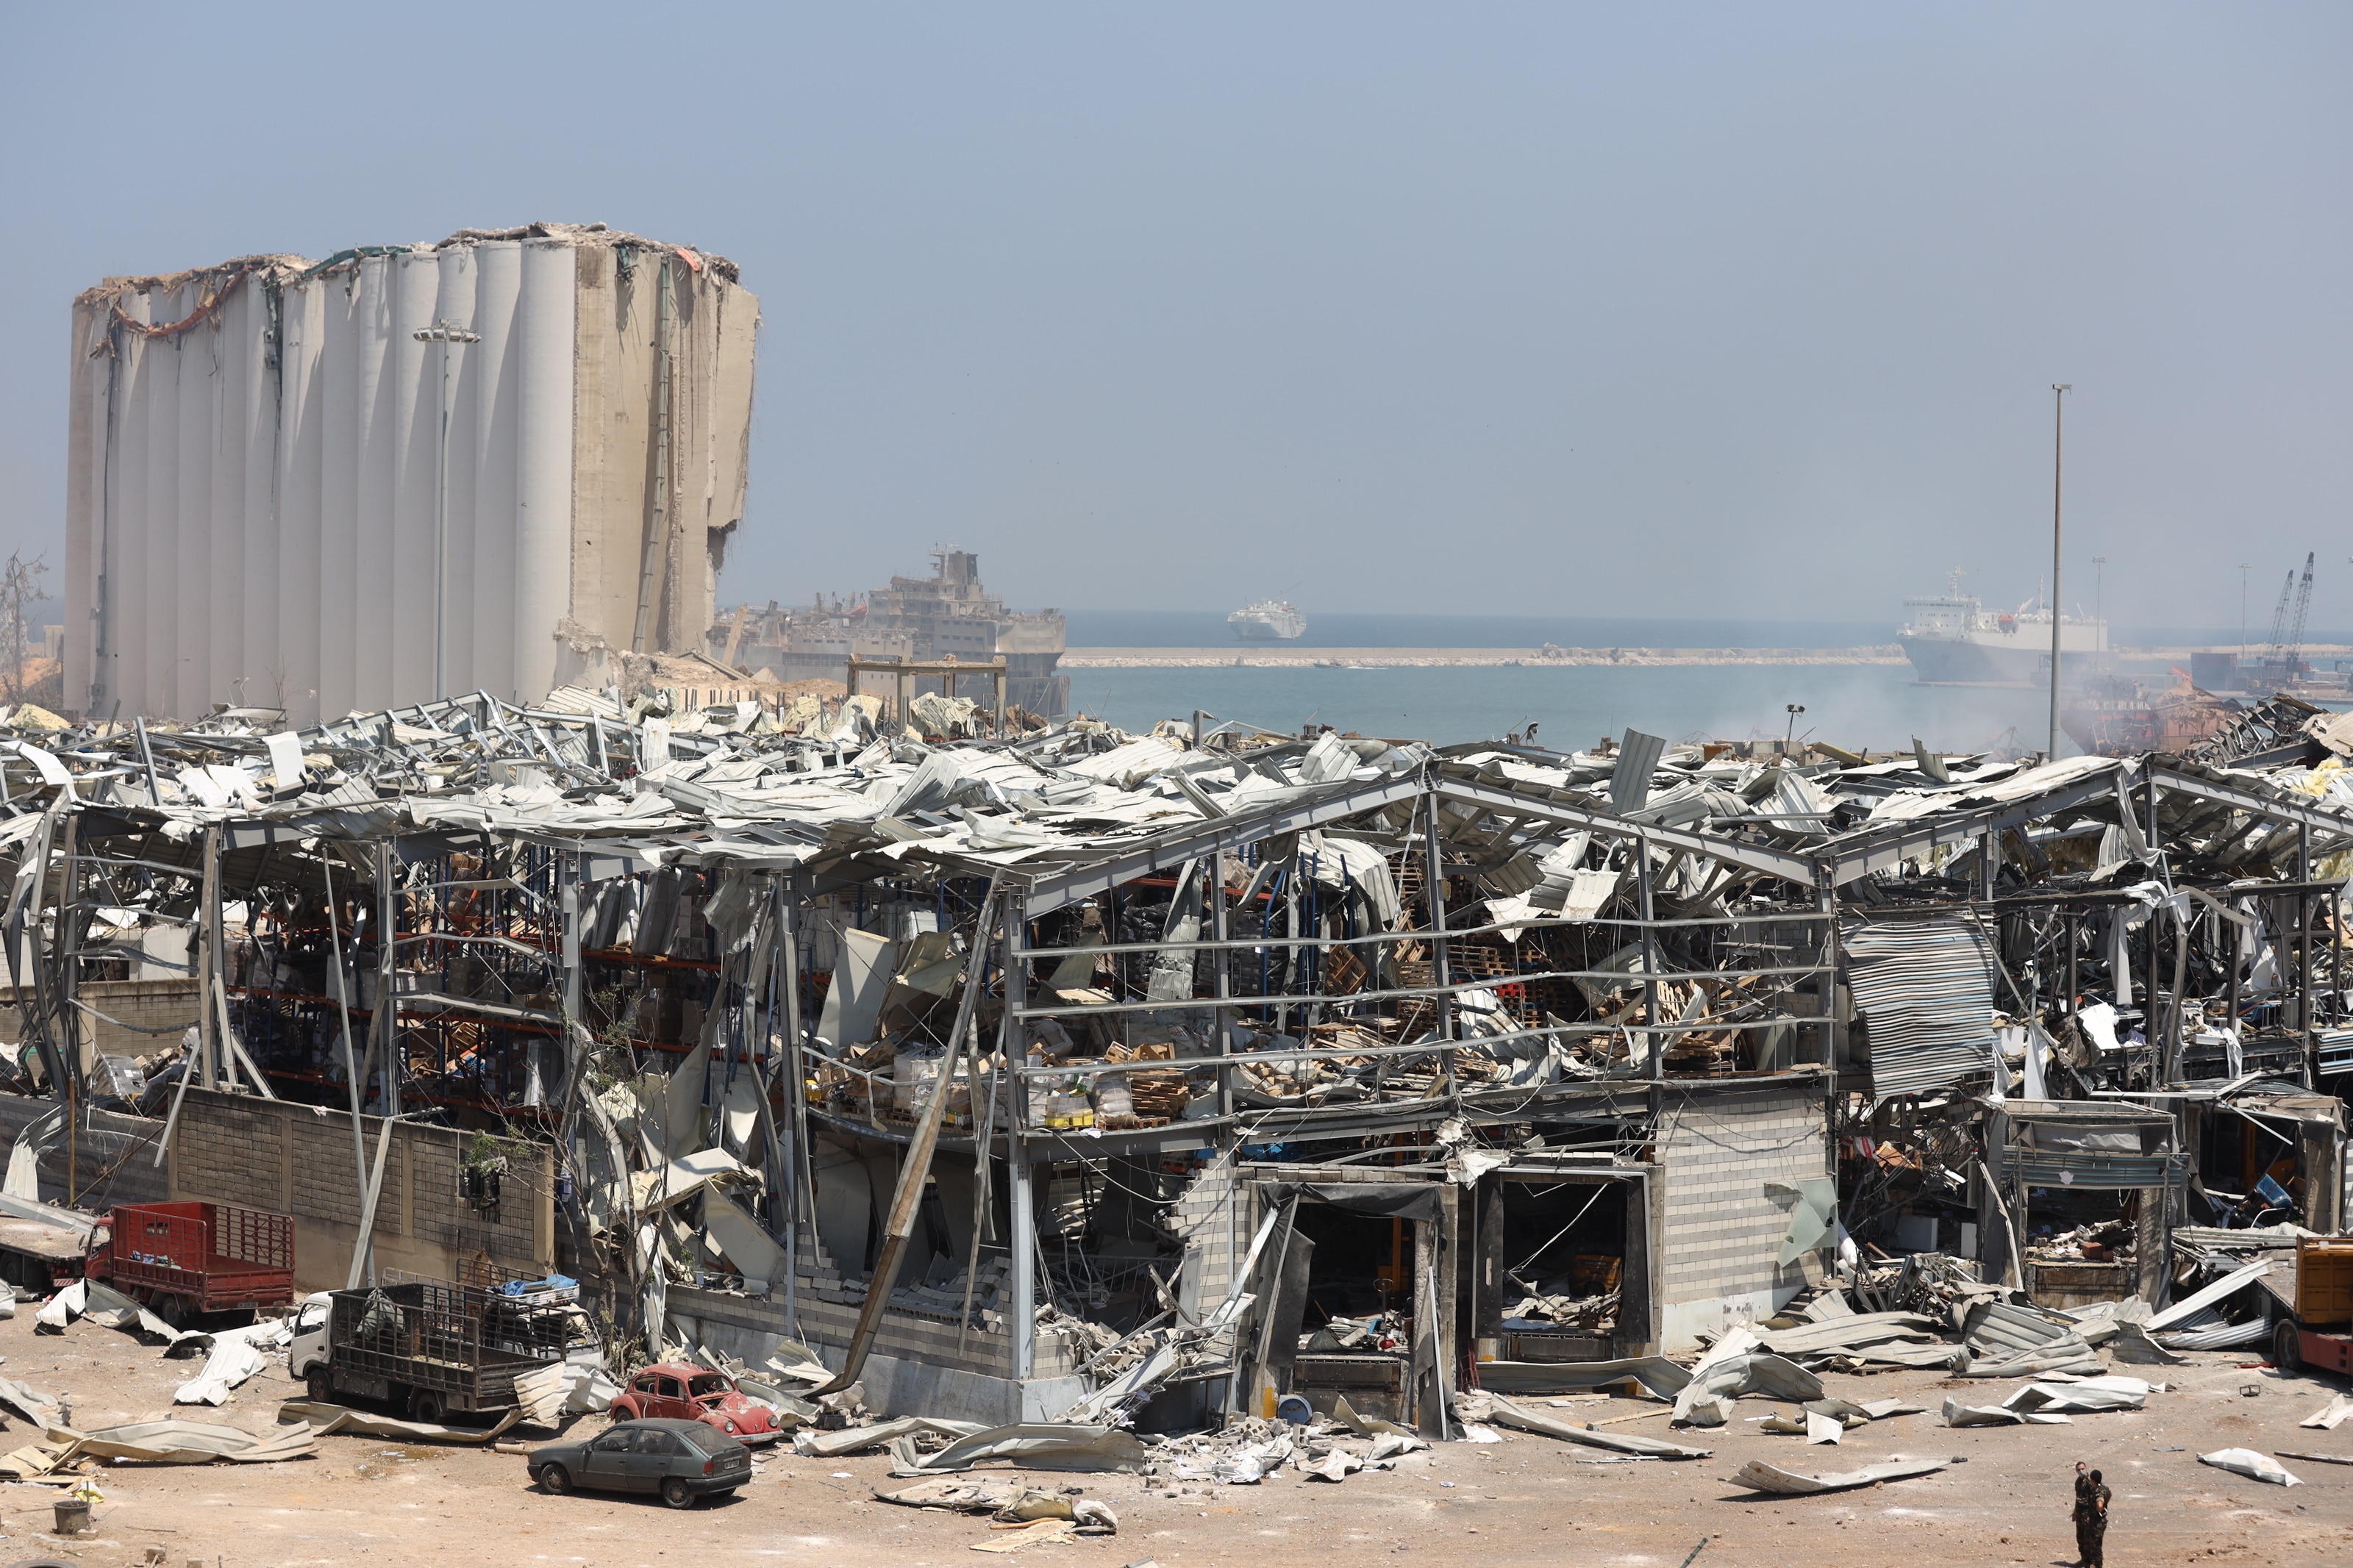 The site of the explosion, one day after the blast at the Beirut Port.